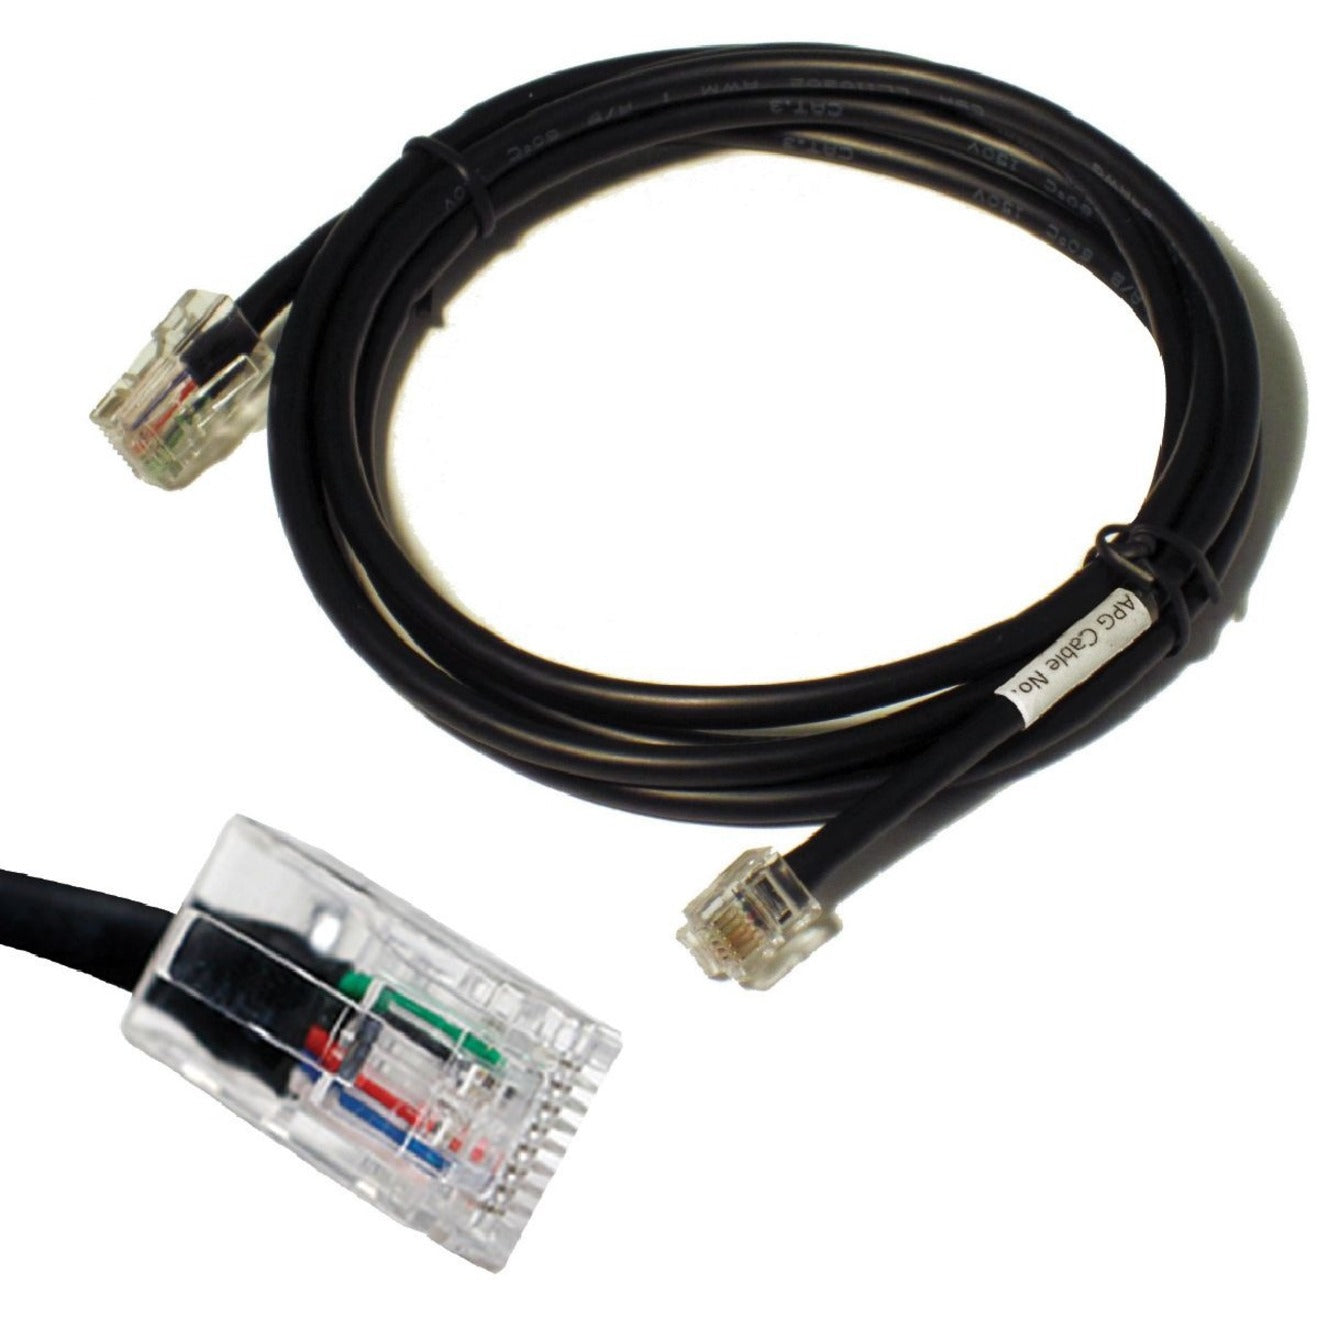 apg CD-101A-10 MultiPRO Data Transfer Cable, 10 ft for Epson TM & Star TSP/SP Printers